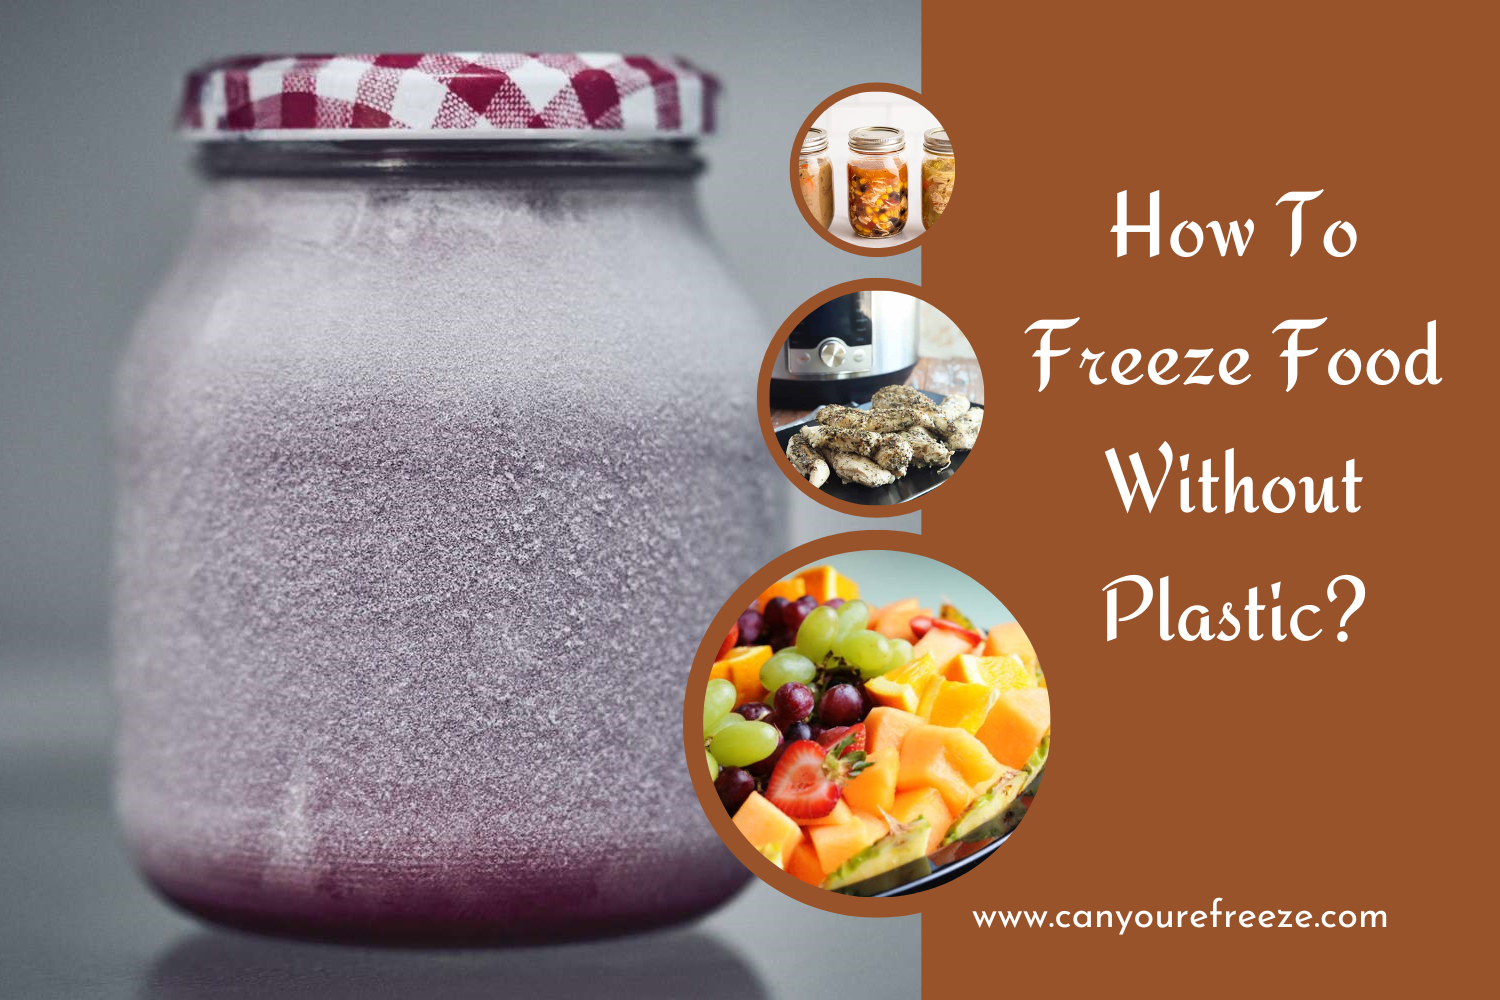 How To Freeze Food Without Plastic